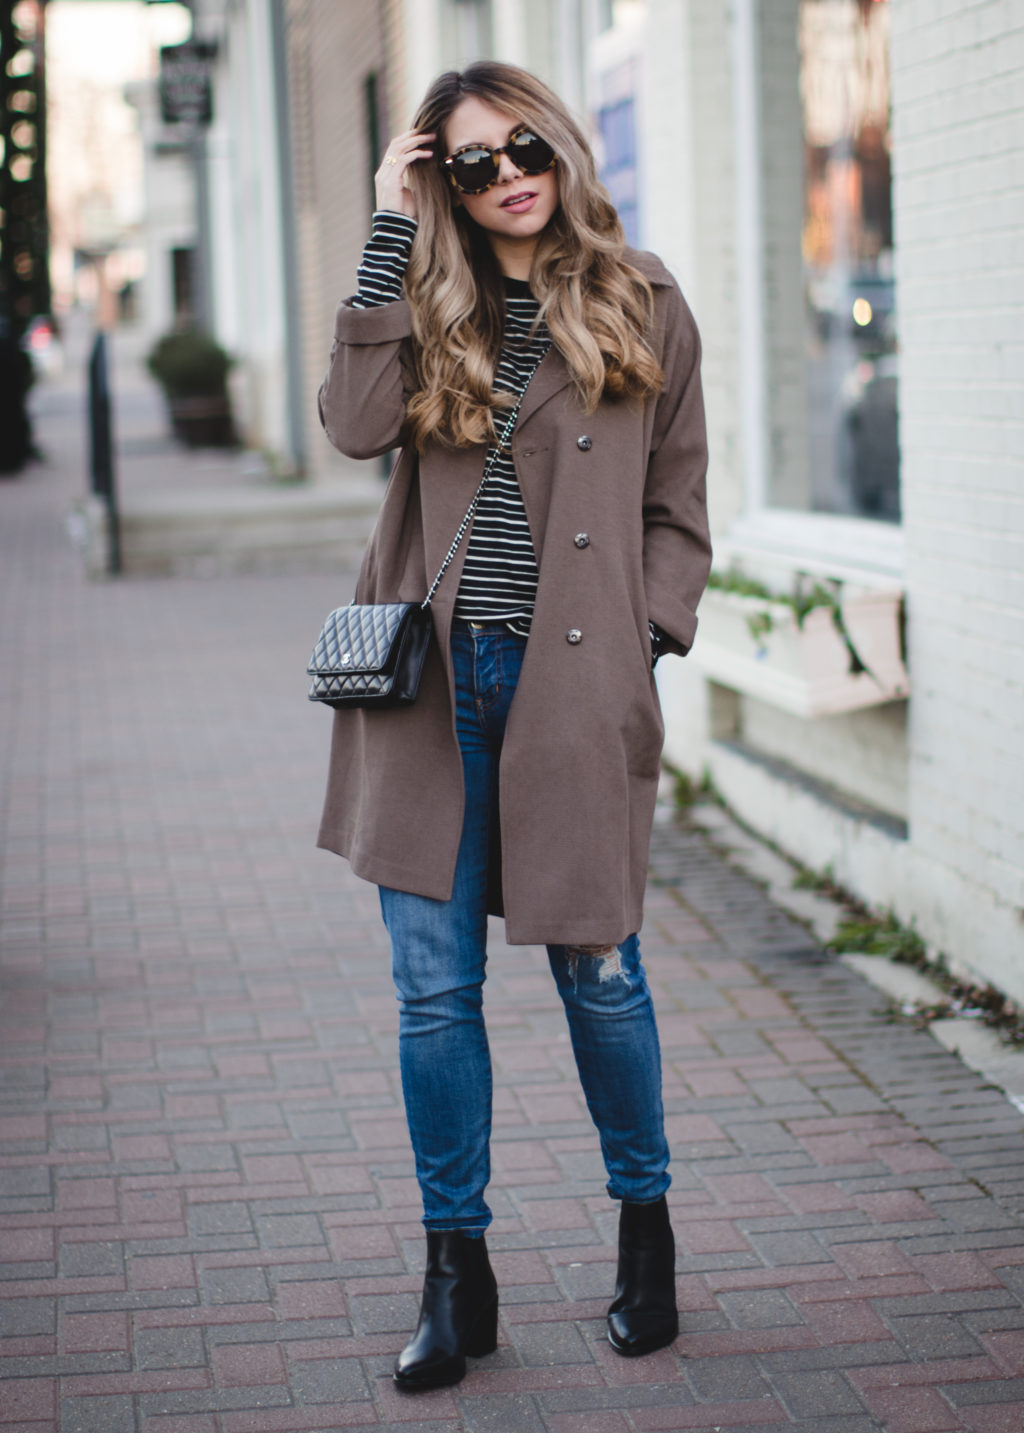 Lightweight Jacket Outfit